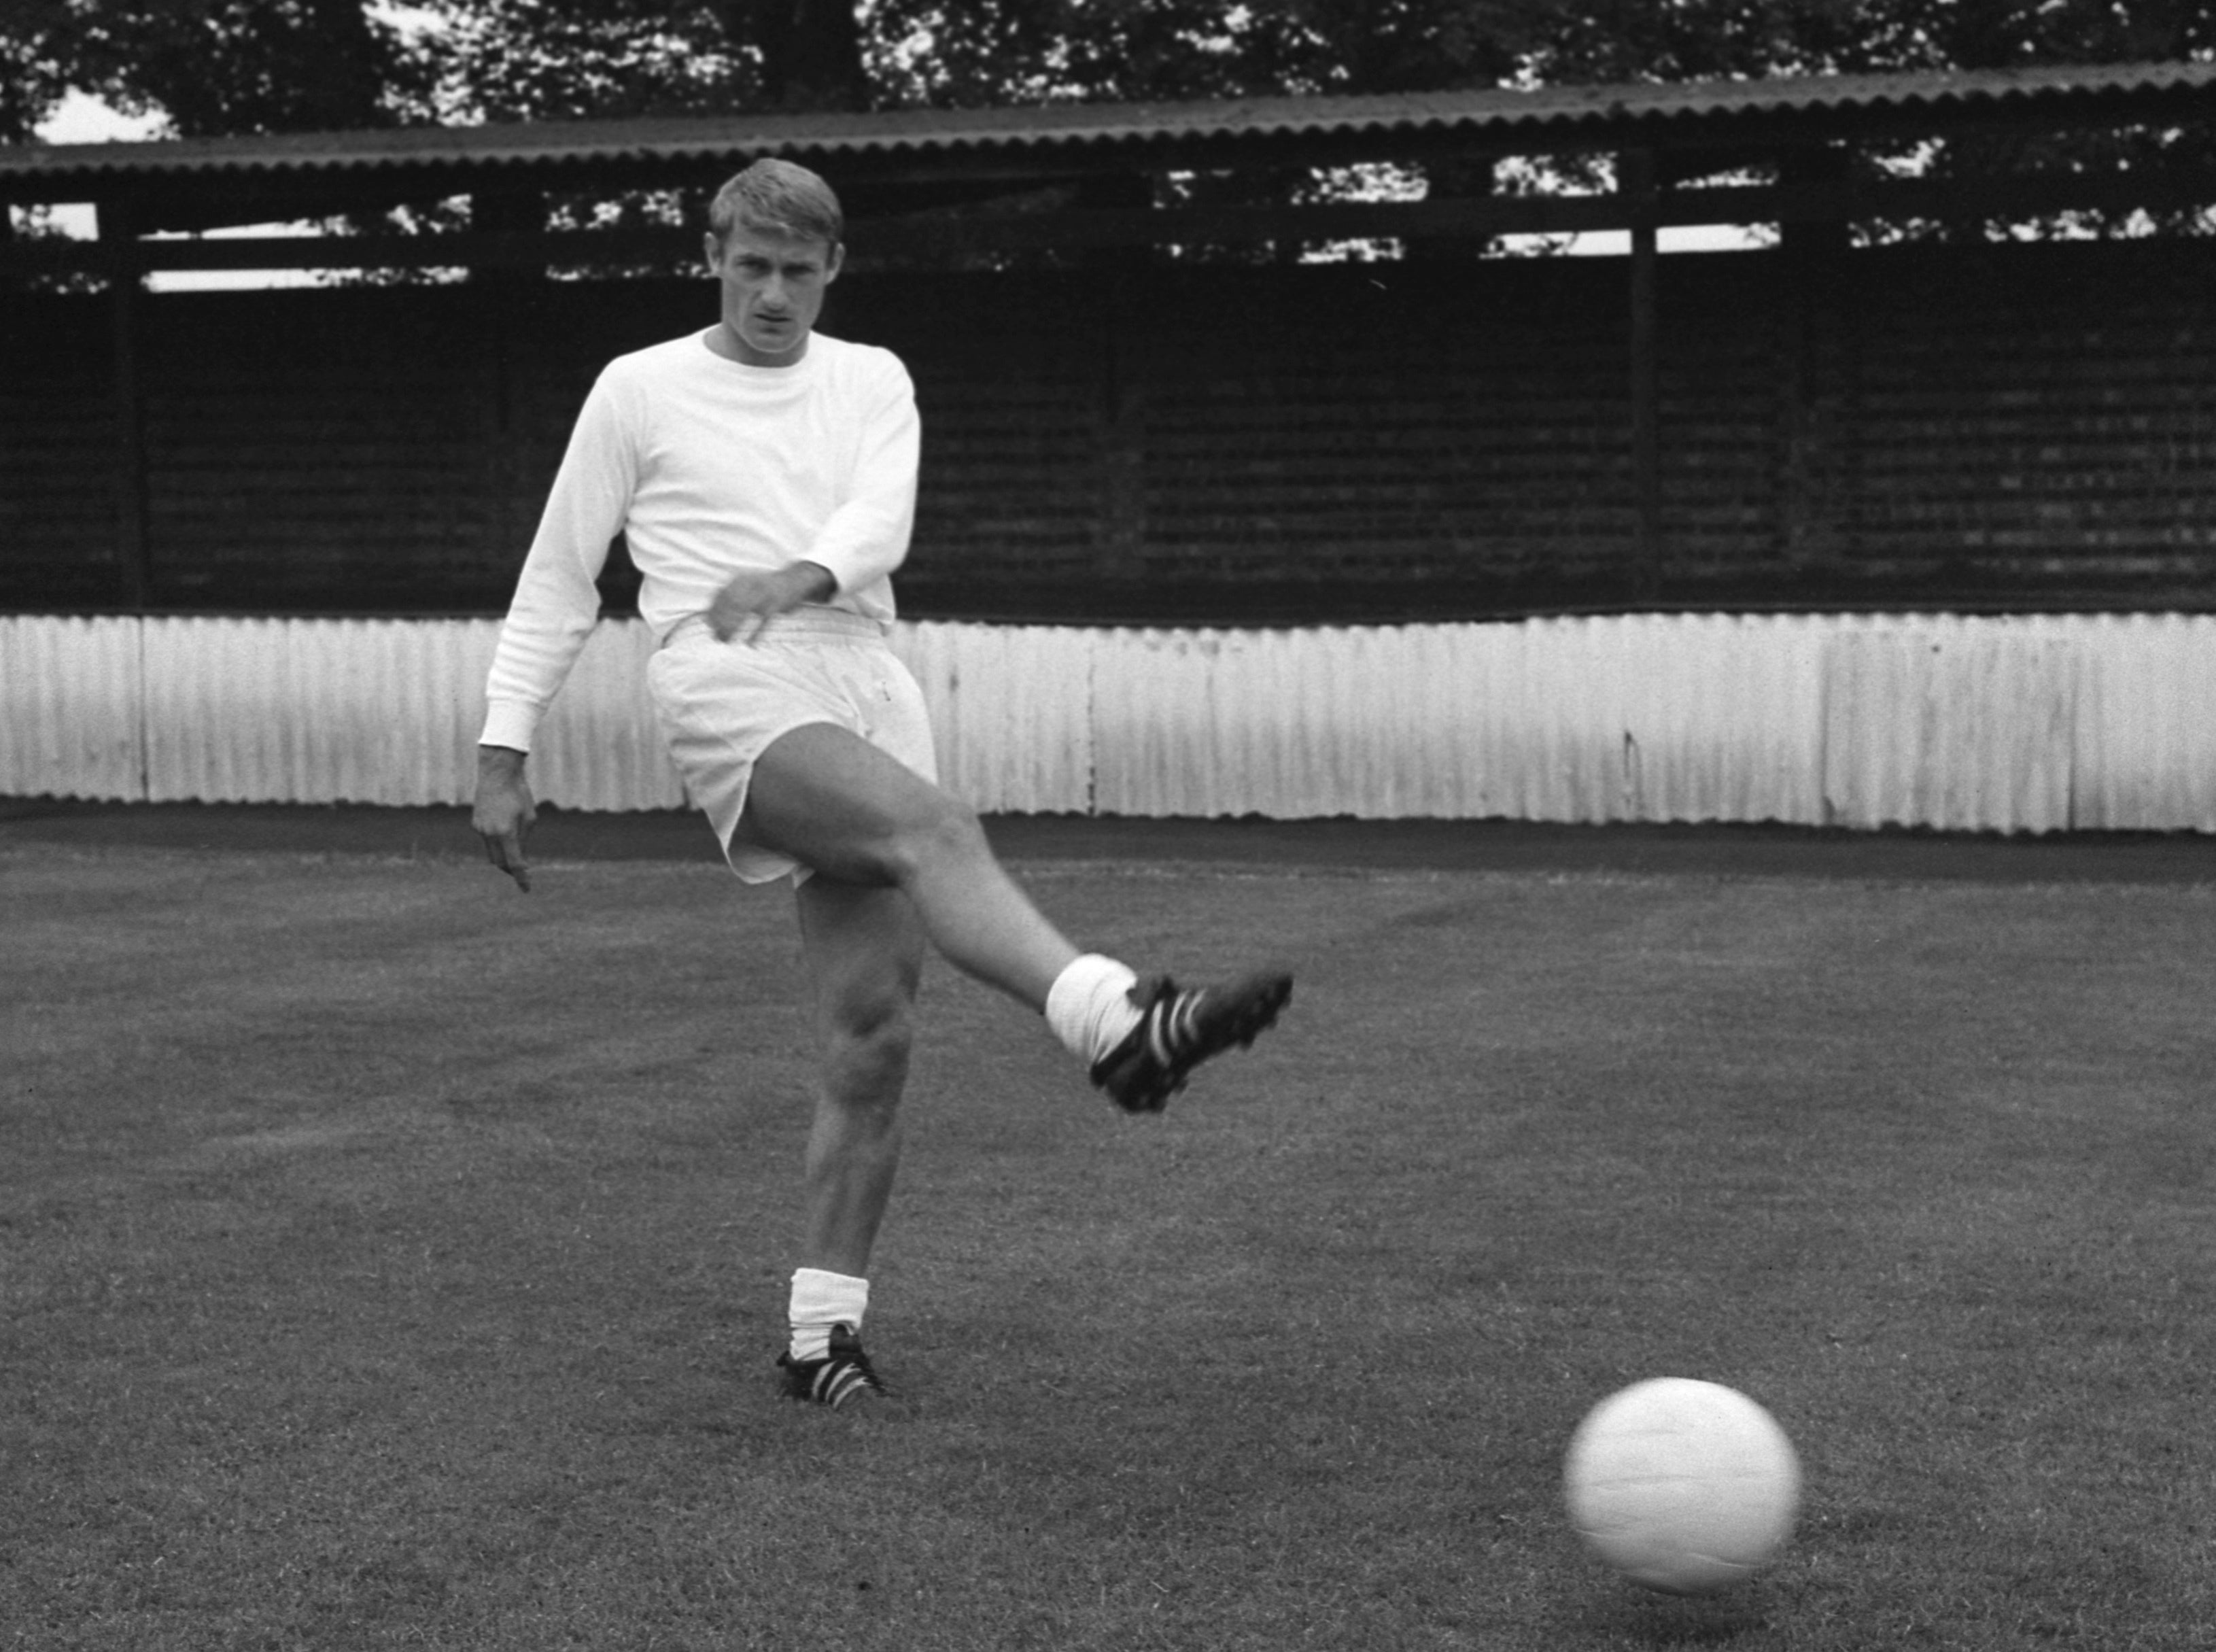 Roger Hunt earned 34 caps for England and spent most of his career, which spanned between 1958 and 1972, at Liverpool (PA Archive)